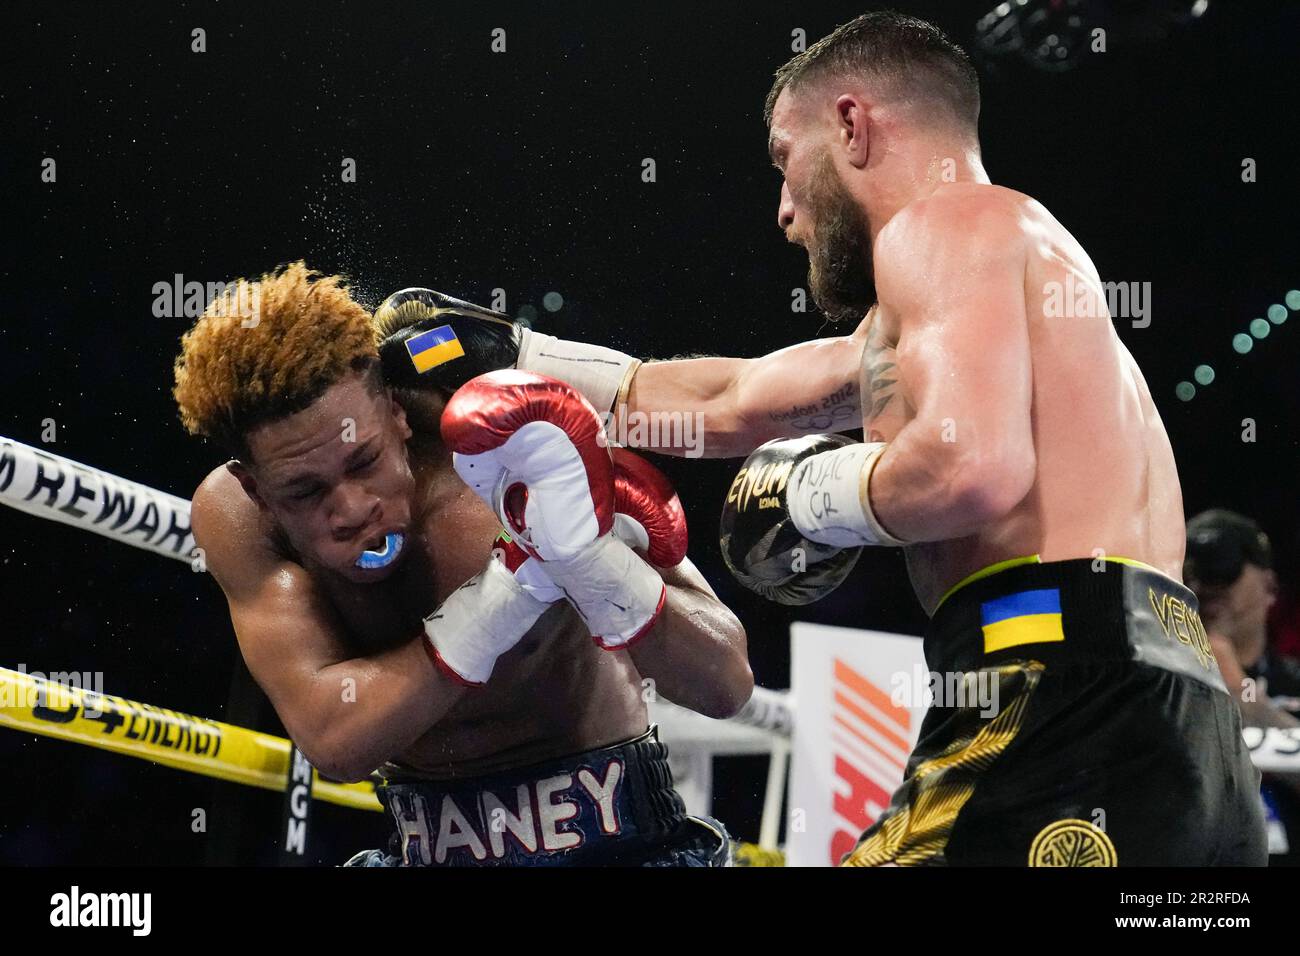 Devin Haney, left, fights Vasiliy Lomachenko in an undisputed lightweight championship boxing match Saturday, May 20, 2023, in Las Vegas